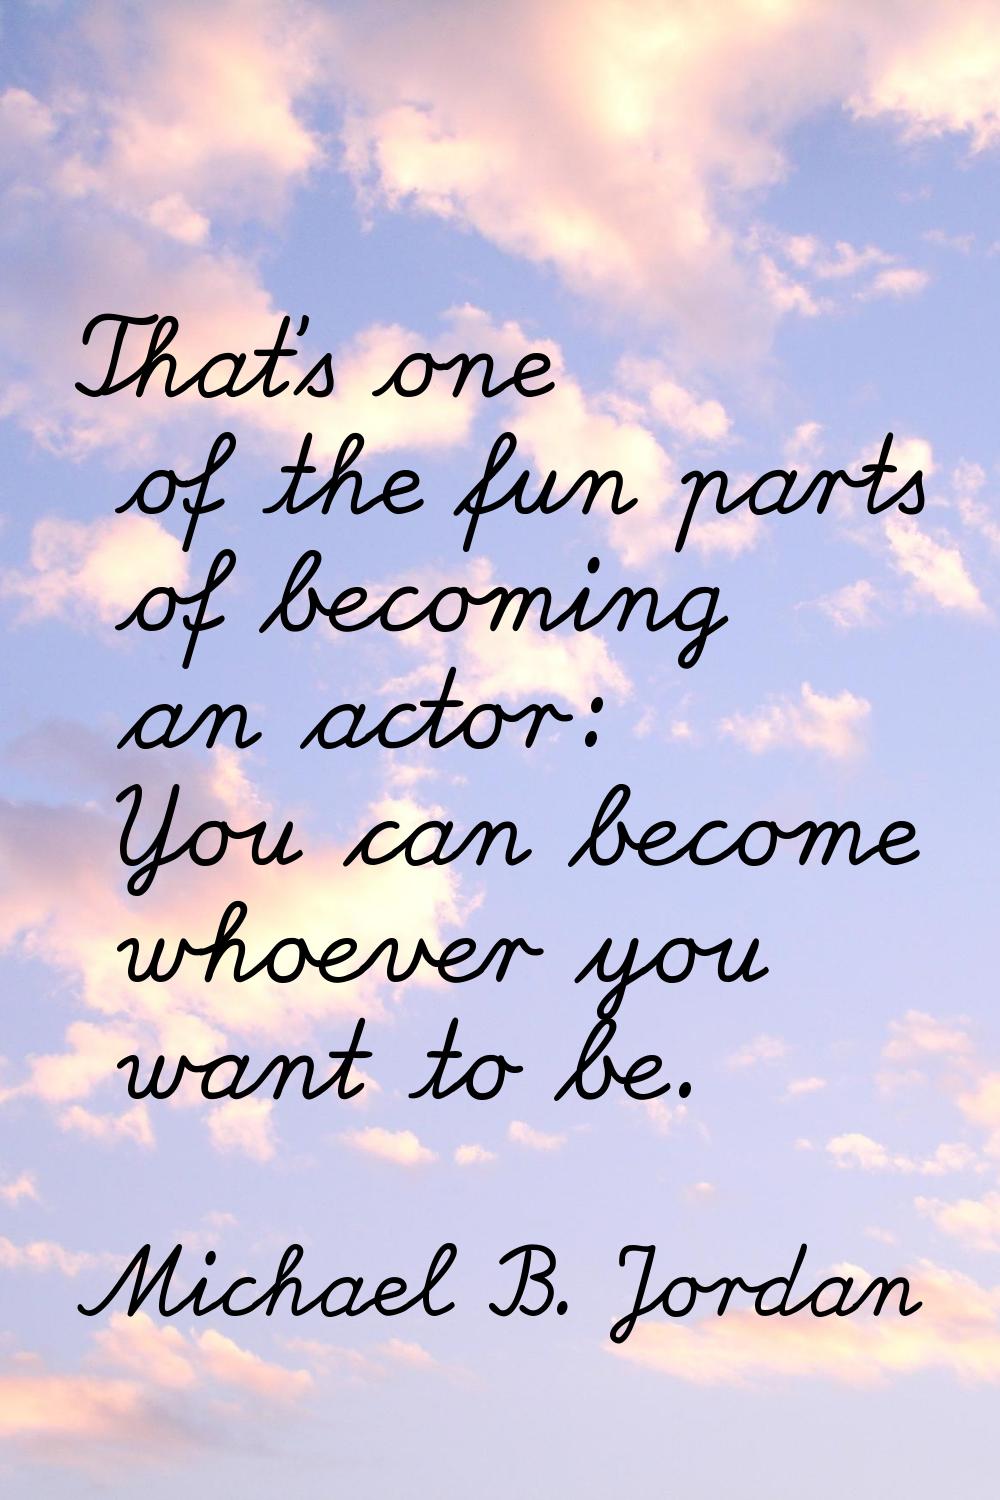 That's one of the fun parts of becoming an actor: You can become whoever you want to be.